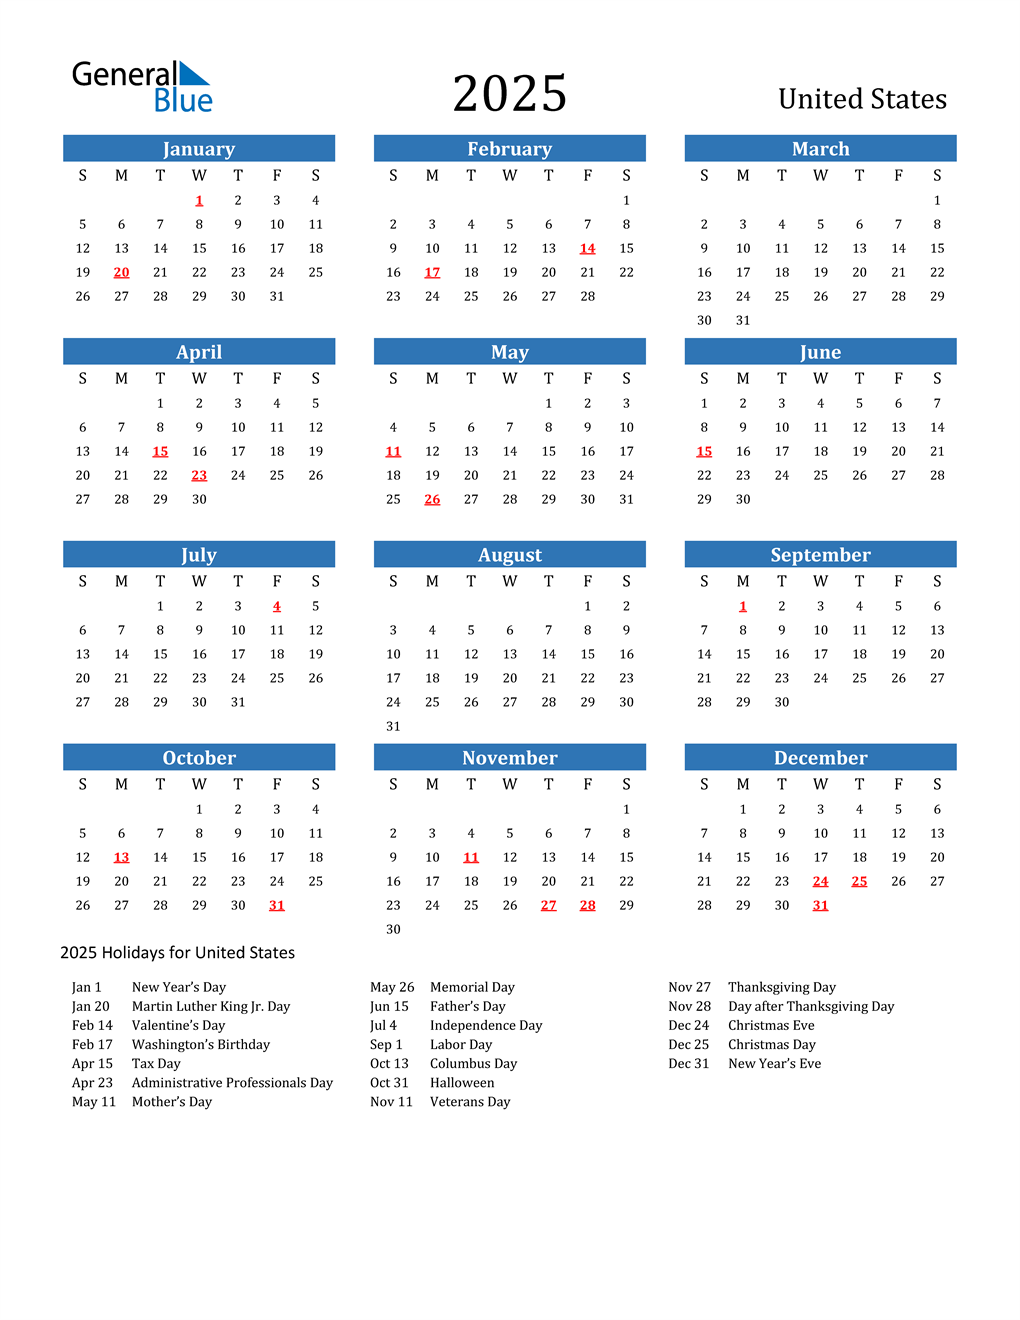 2025 United States Calendar with Holidays